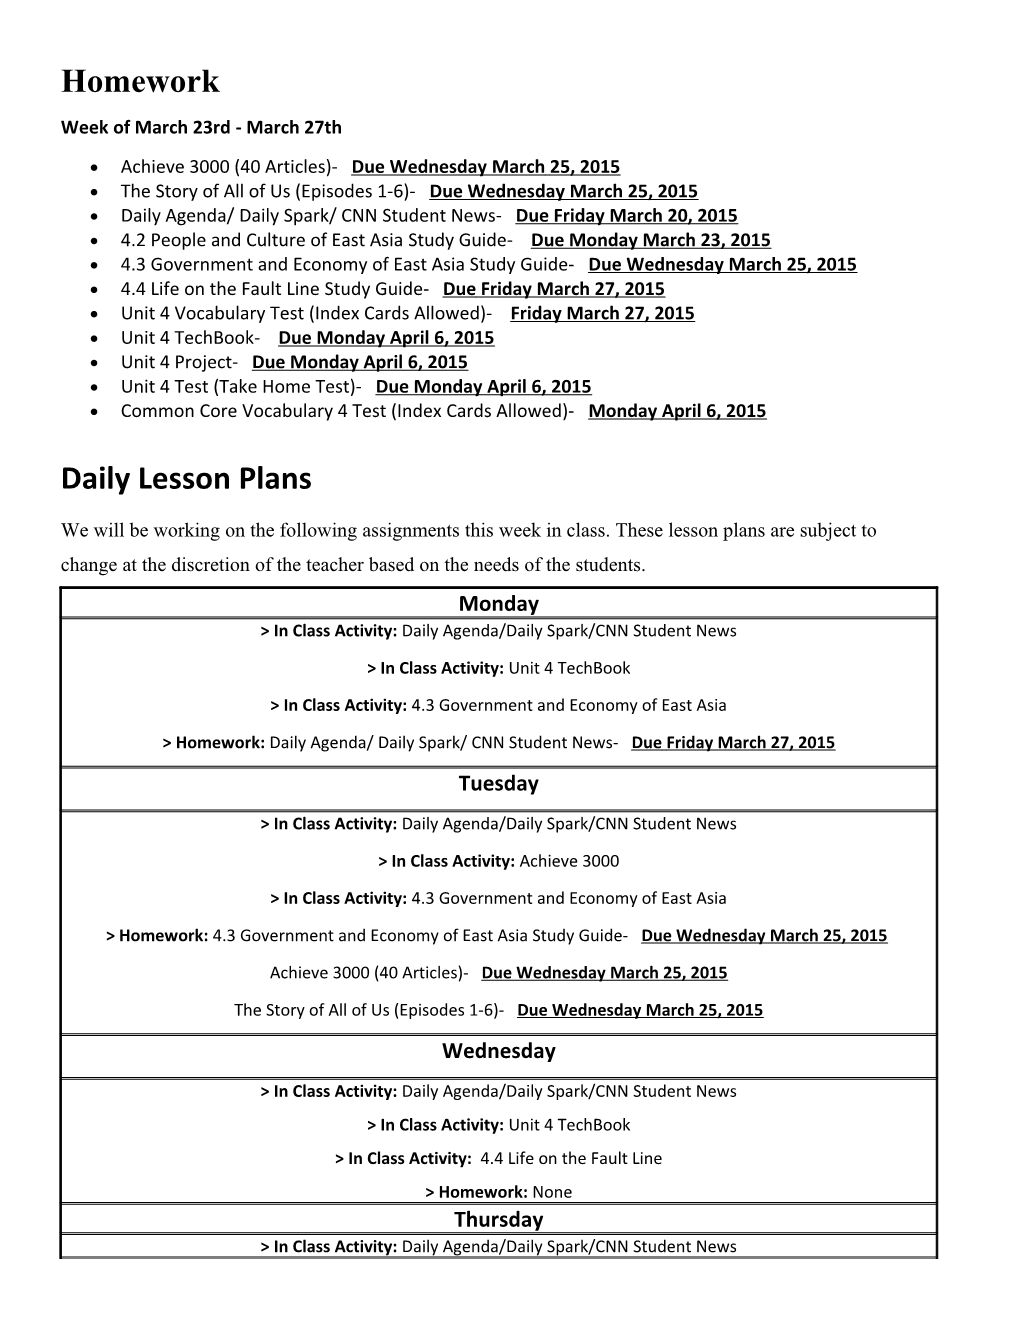 Achieve 3000 (40 Articles)- Due Wednesday March25, 2015